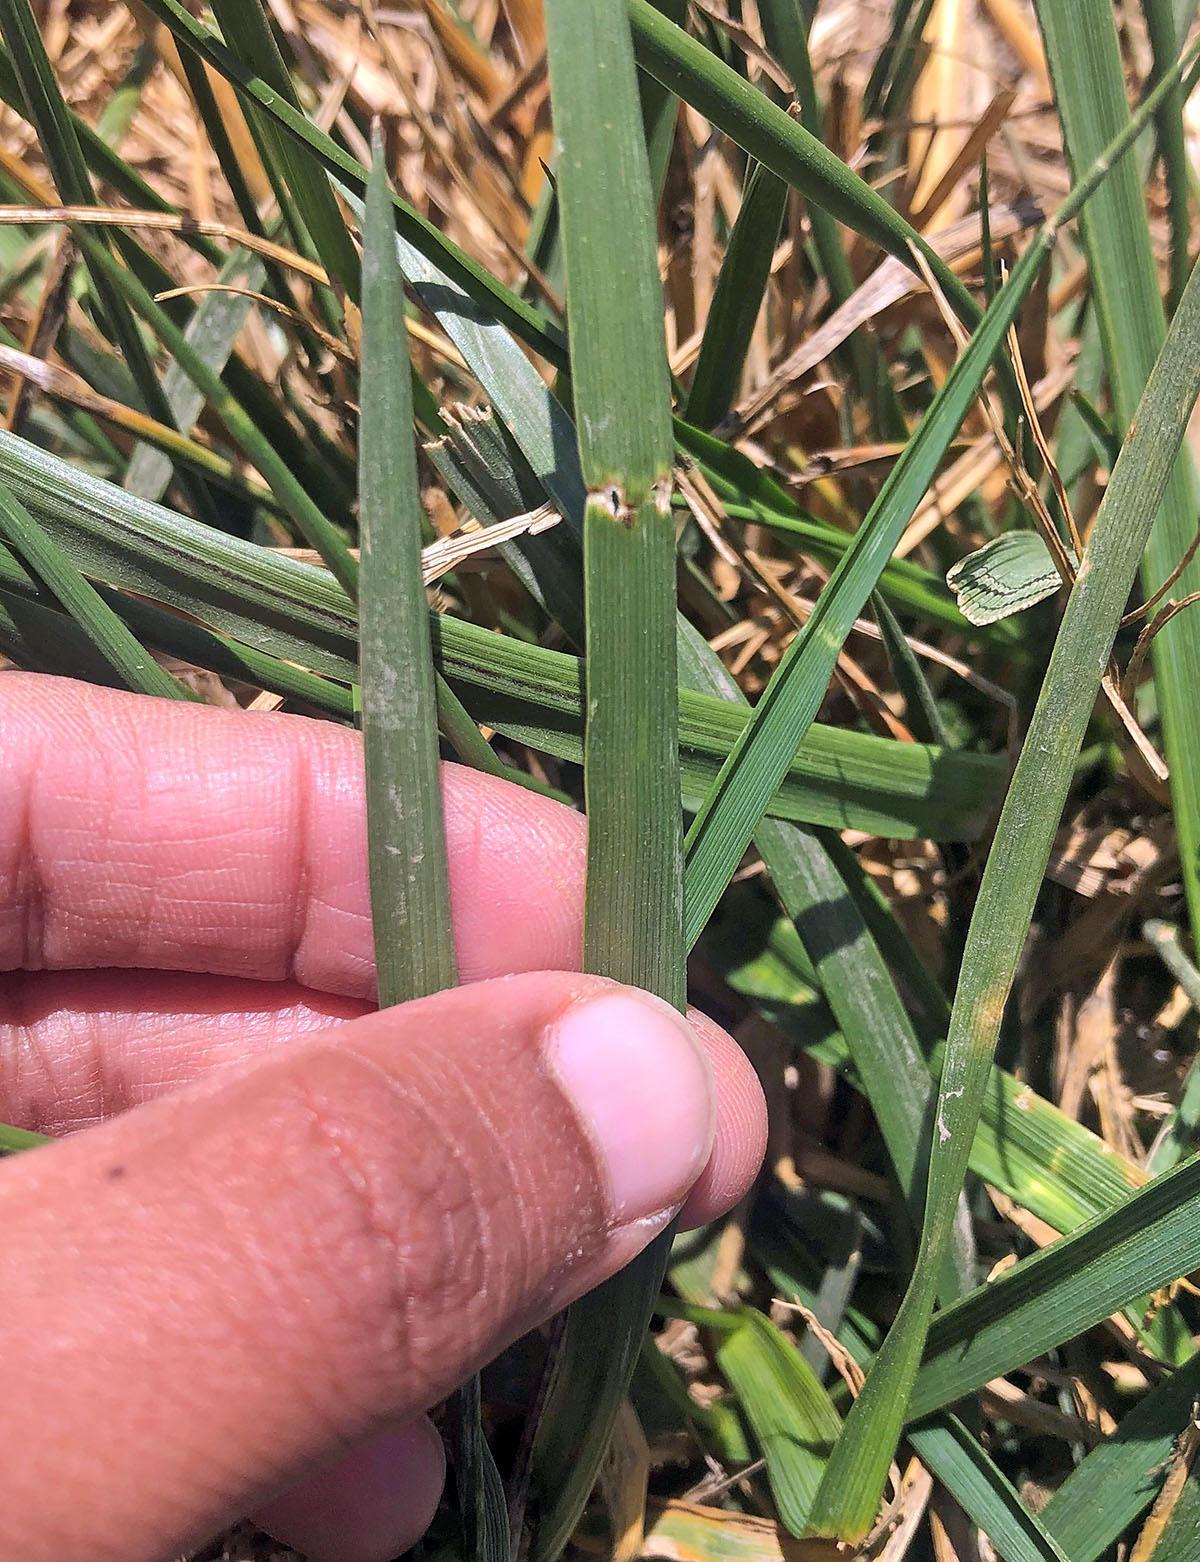 fingers grasp a blade of grass with two mirrored holes